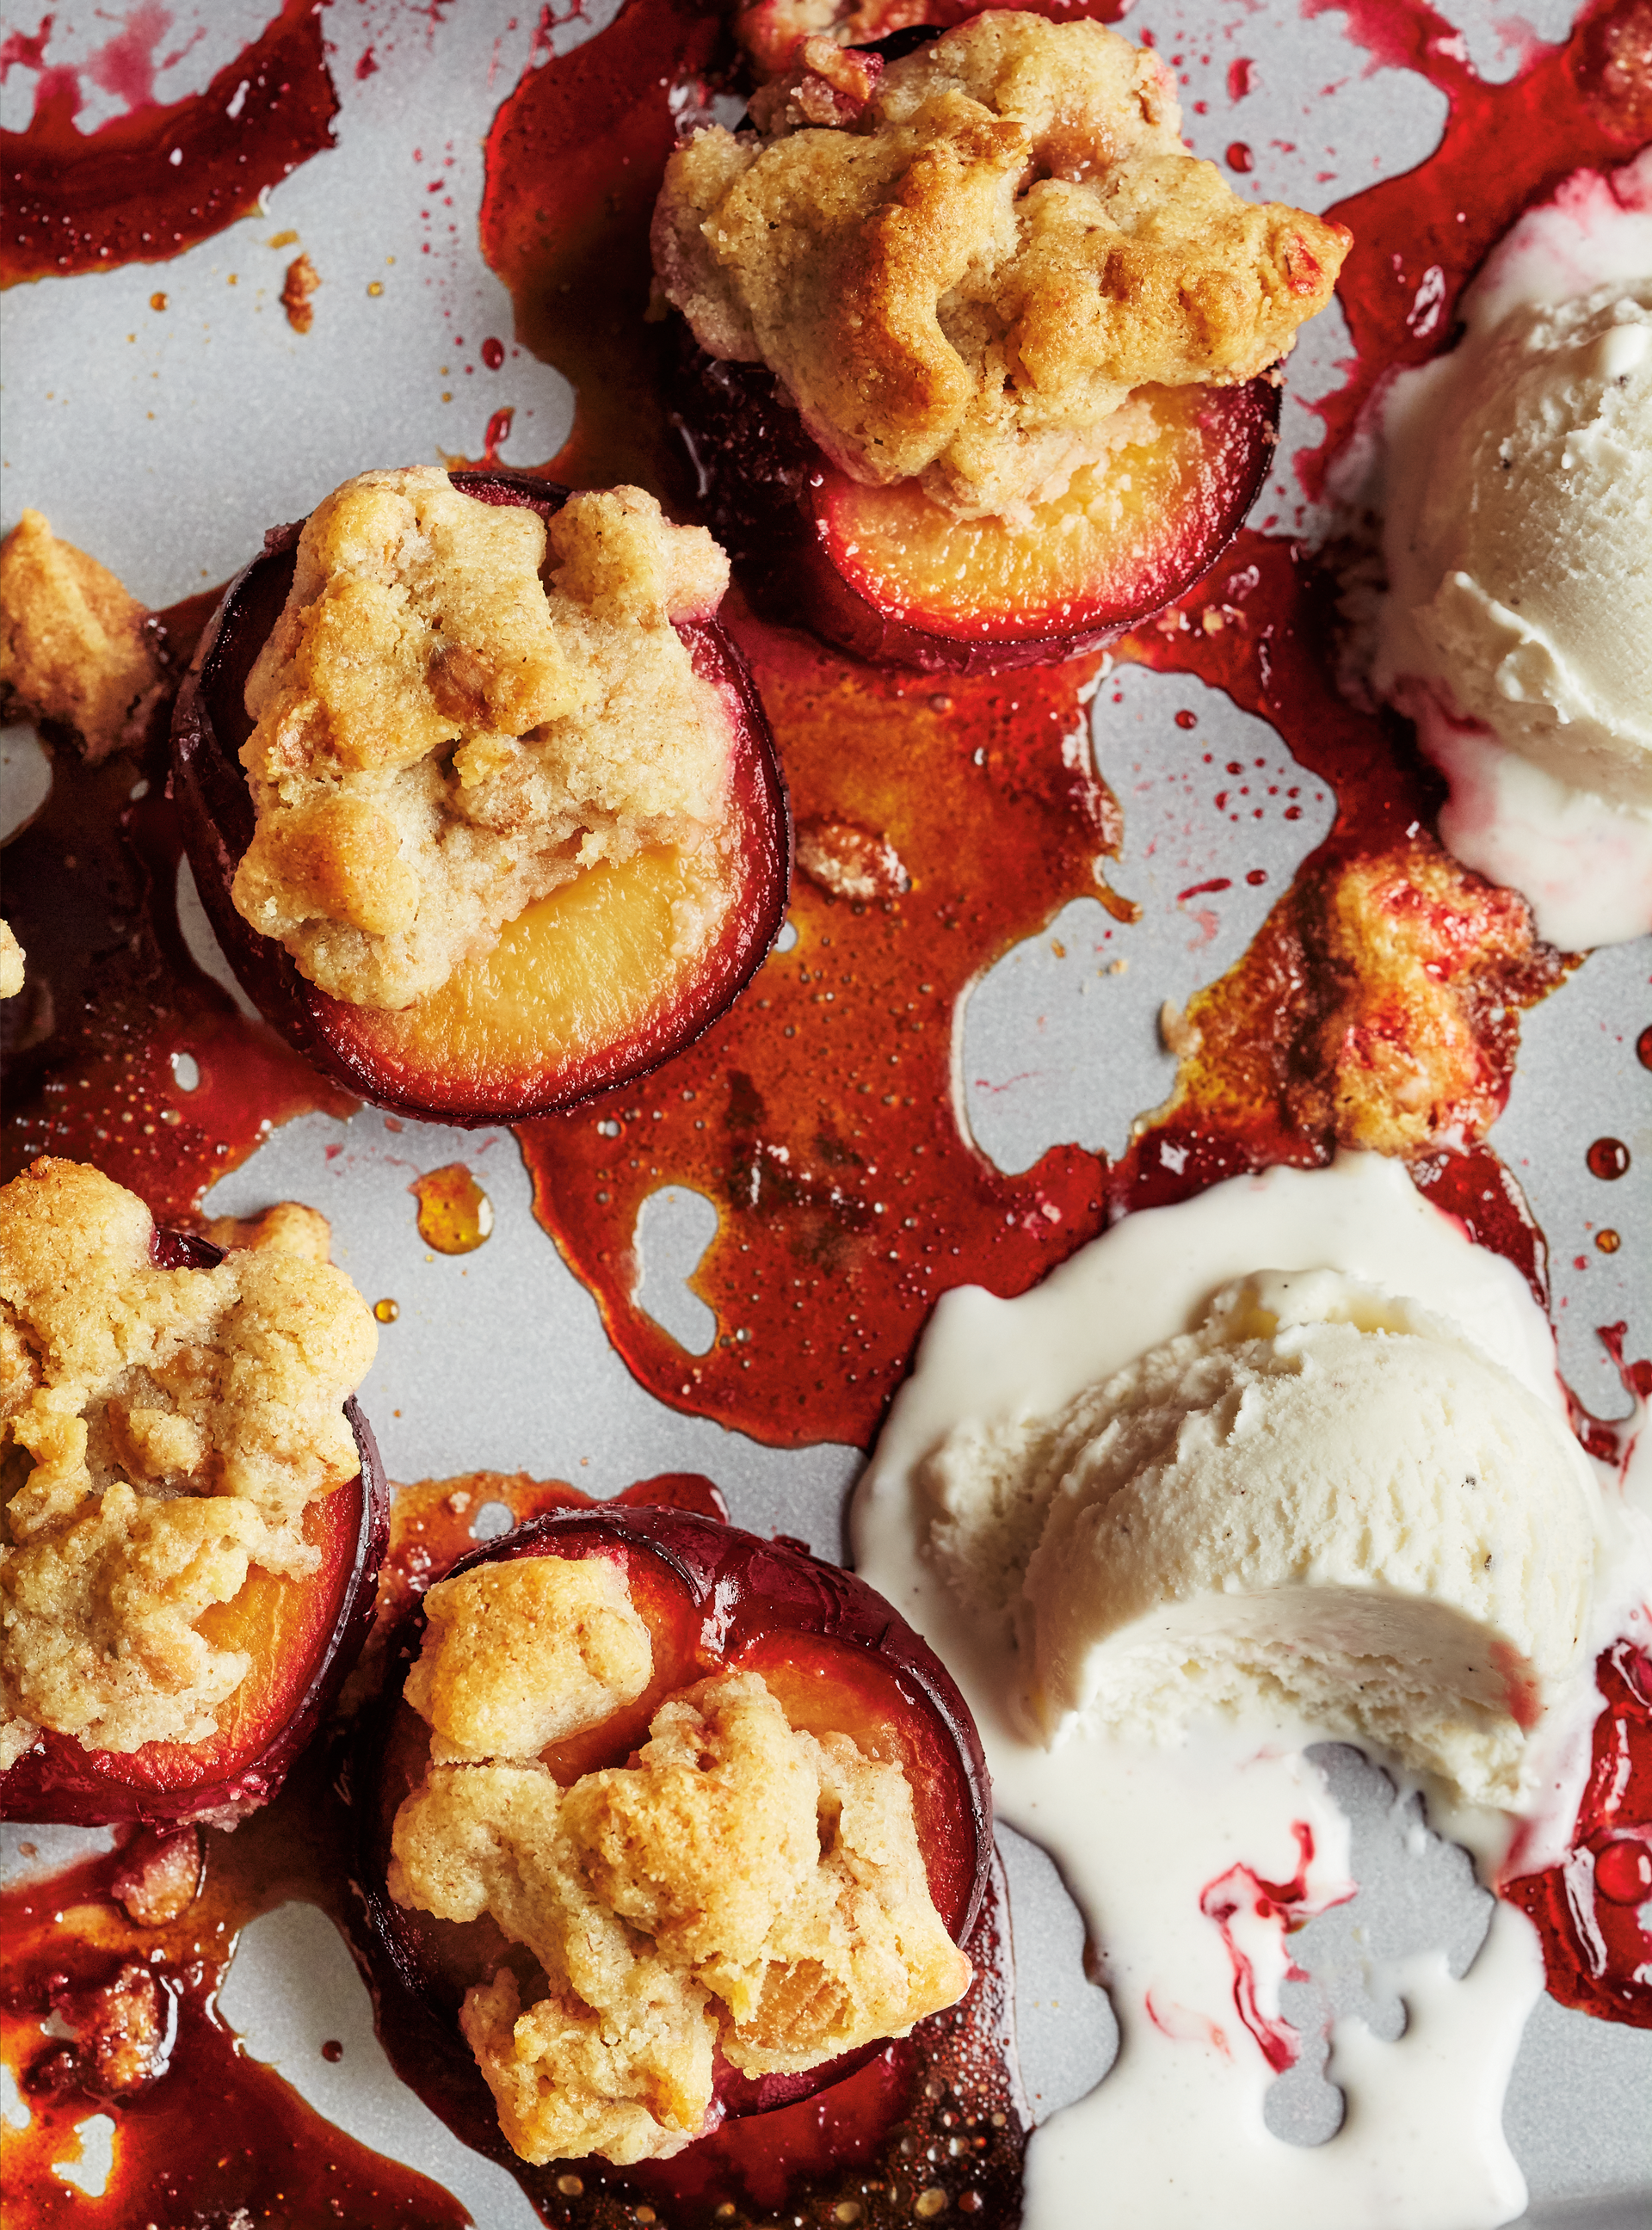 Roasted Plums with Almond-Spelt Crumble